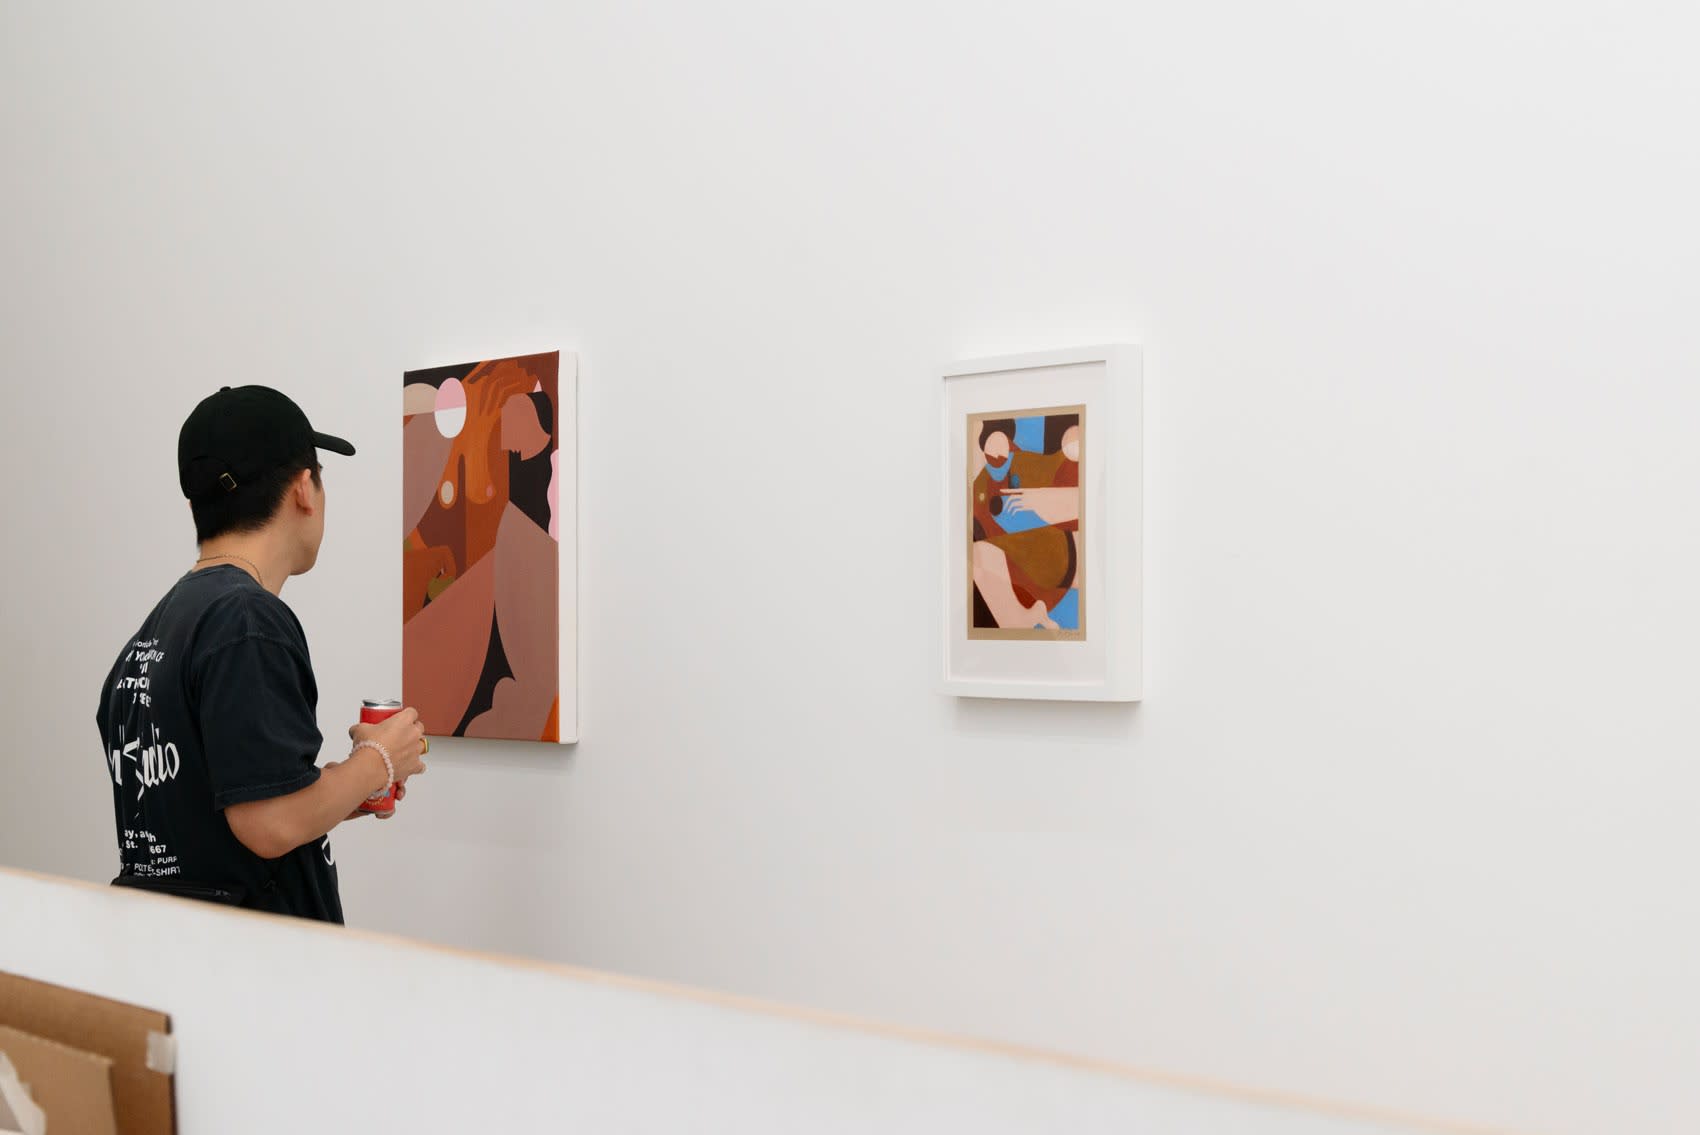 A man in a ball cap and black shirt hold a drink and looks closely at Liz Flores's painting of a woman attempting to scratch her back, rendered in brown, pink, and white neutral tones.